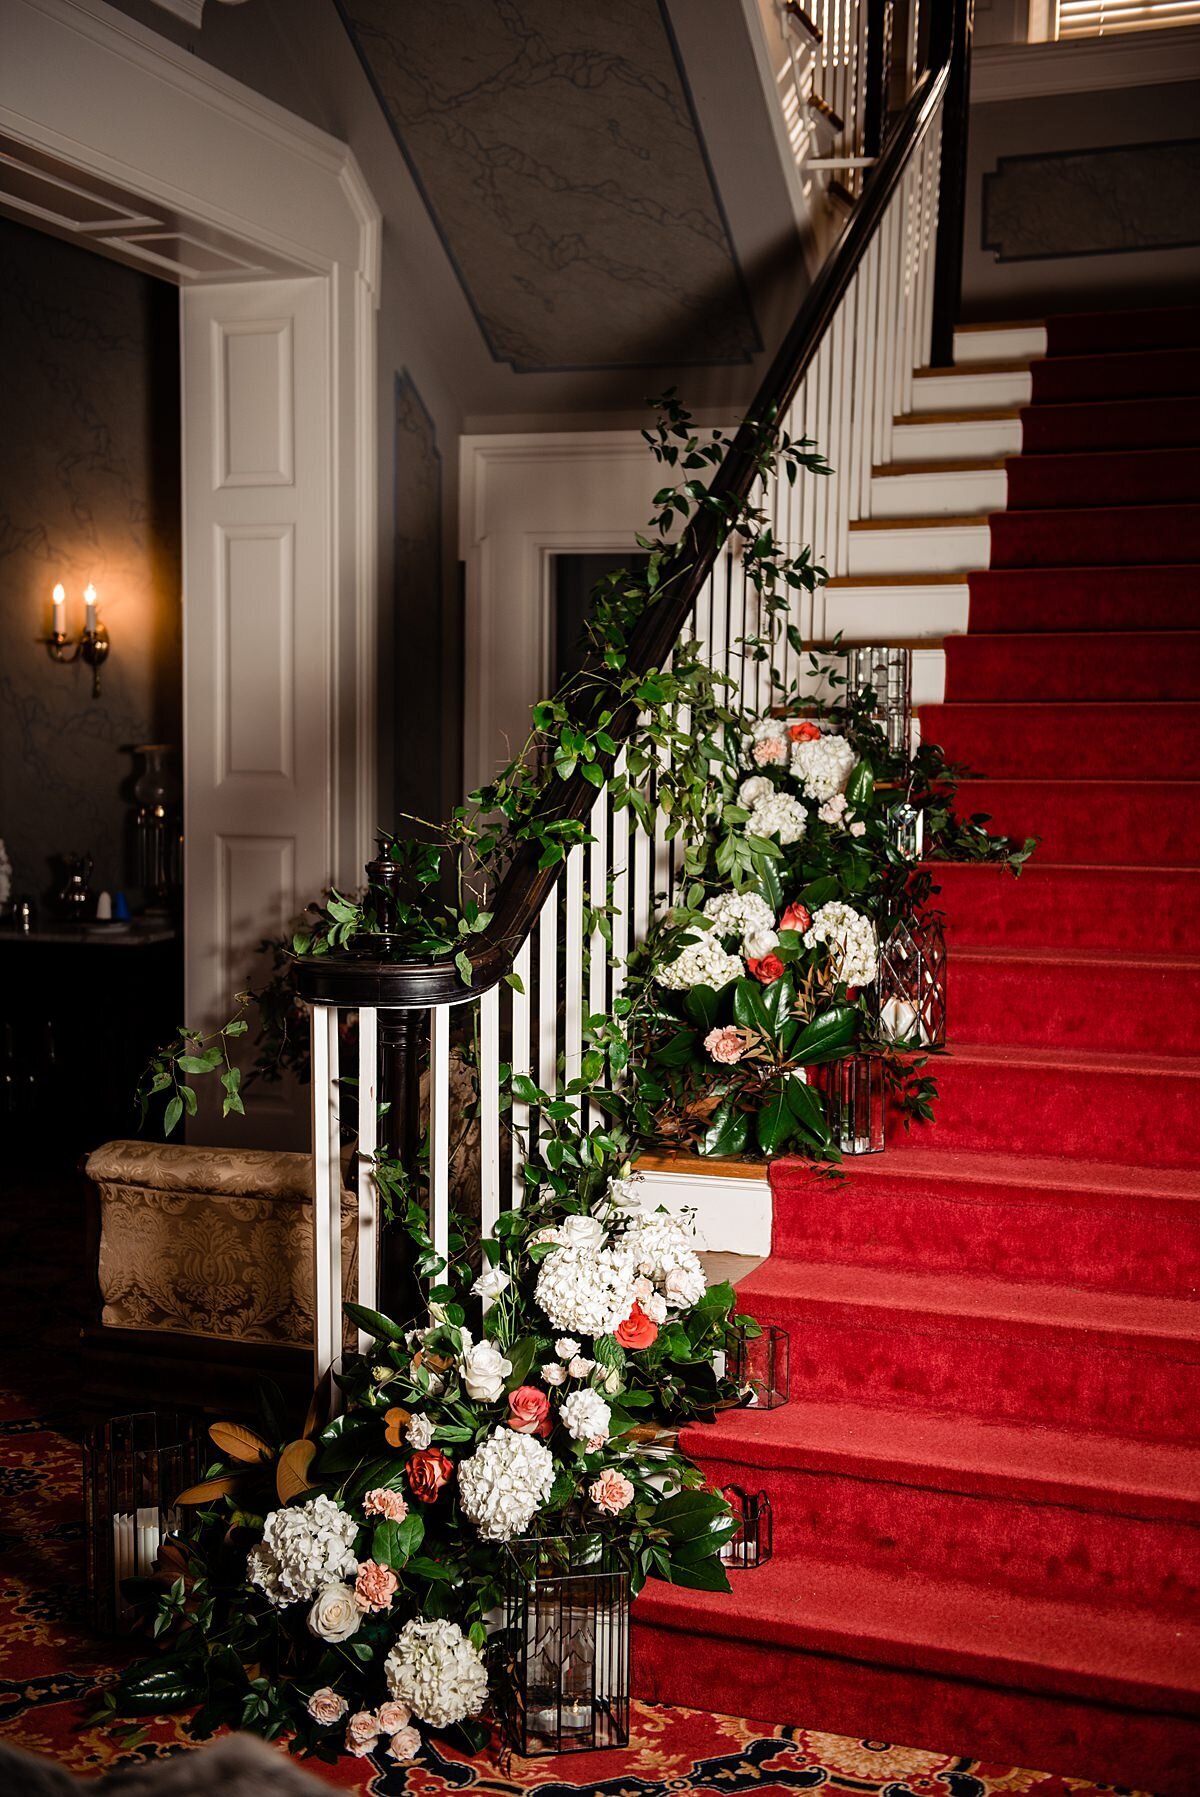 Red carpeted staircase at Rippa Villa decorated with a lush floral installation of white hydrangea, orange roses, peach roses, pink carnations and greenery climbing up the length of the white banister with a dark wood top at Rippa Villa mansion.